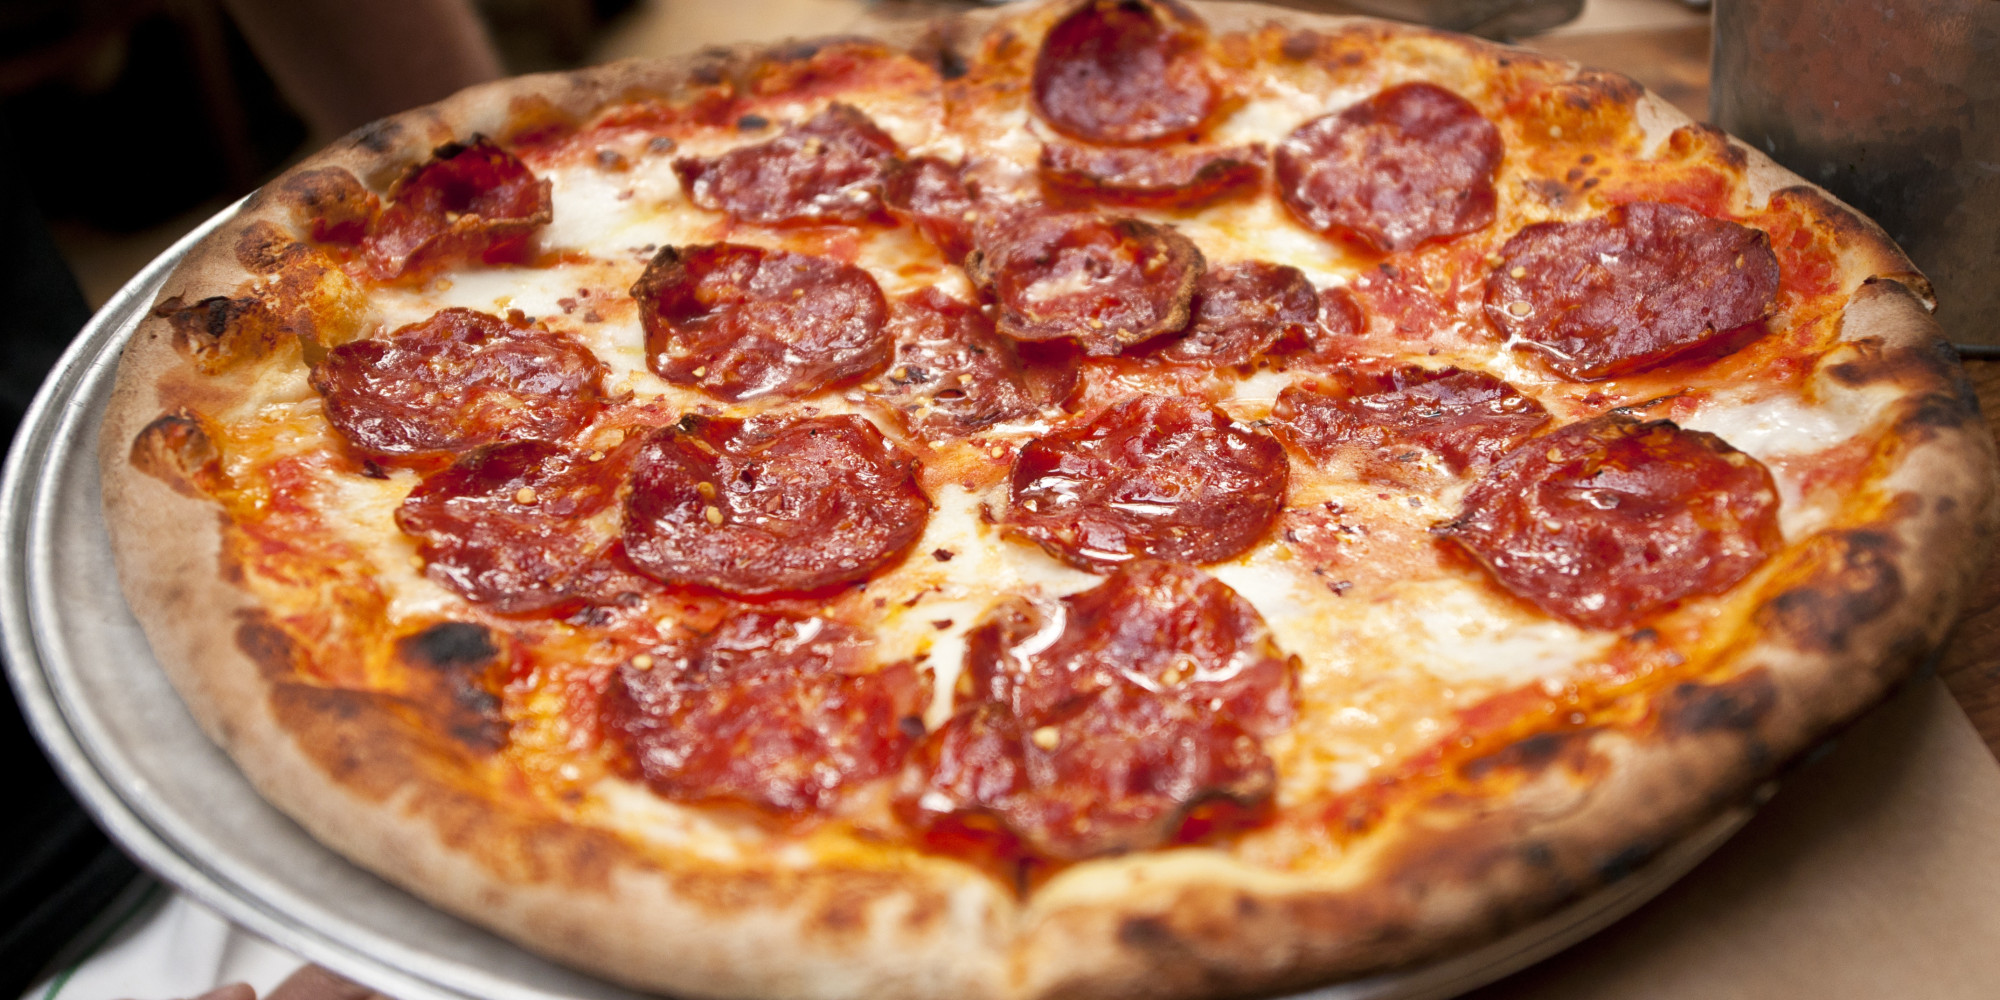 America's Top 7 Cities for Pizza | HuffPost